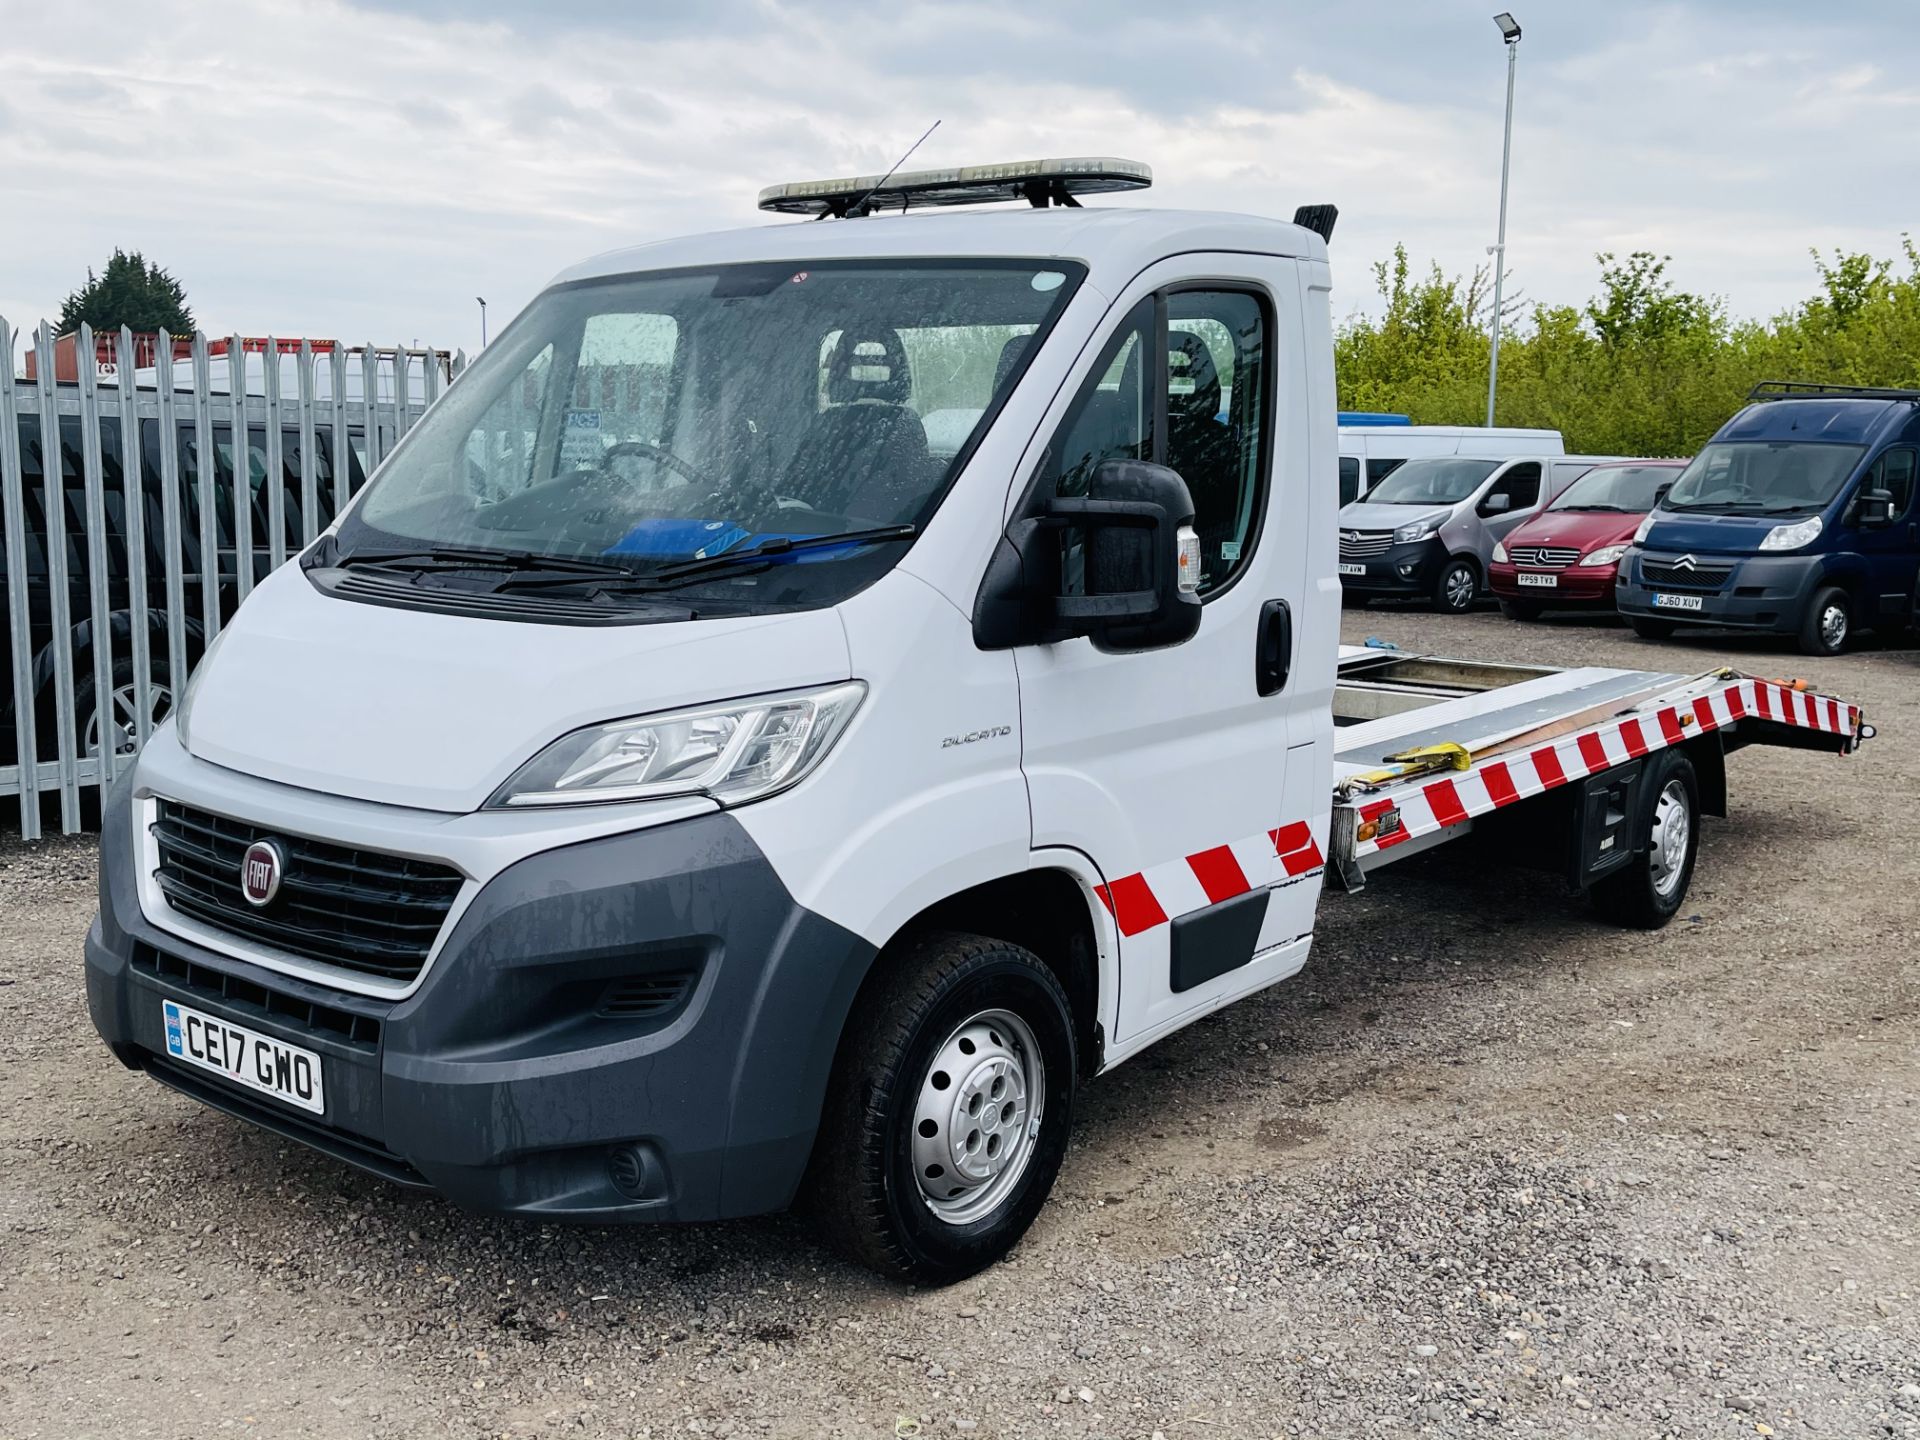 ** ON SALE ** Fiat Ducato 2.3 Multi-jet L3 2017 '17 Reg' Recovery Beaver-Tail -Air con- Alloy body - Image 4 of 17